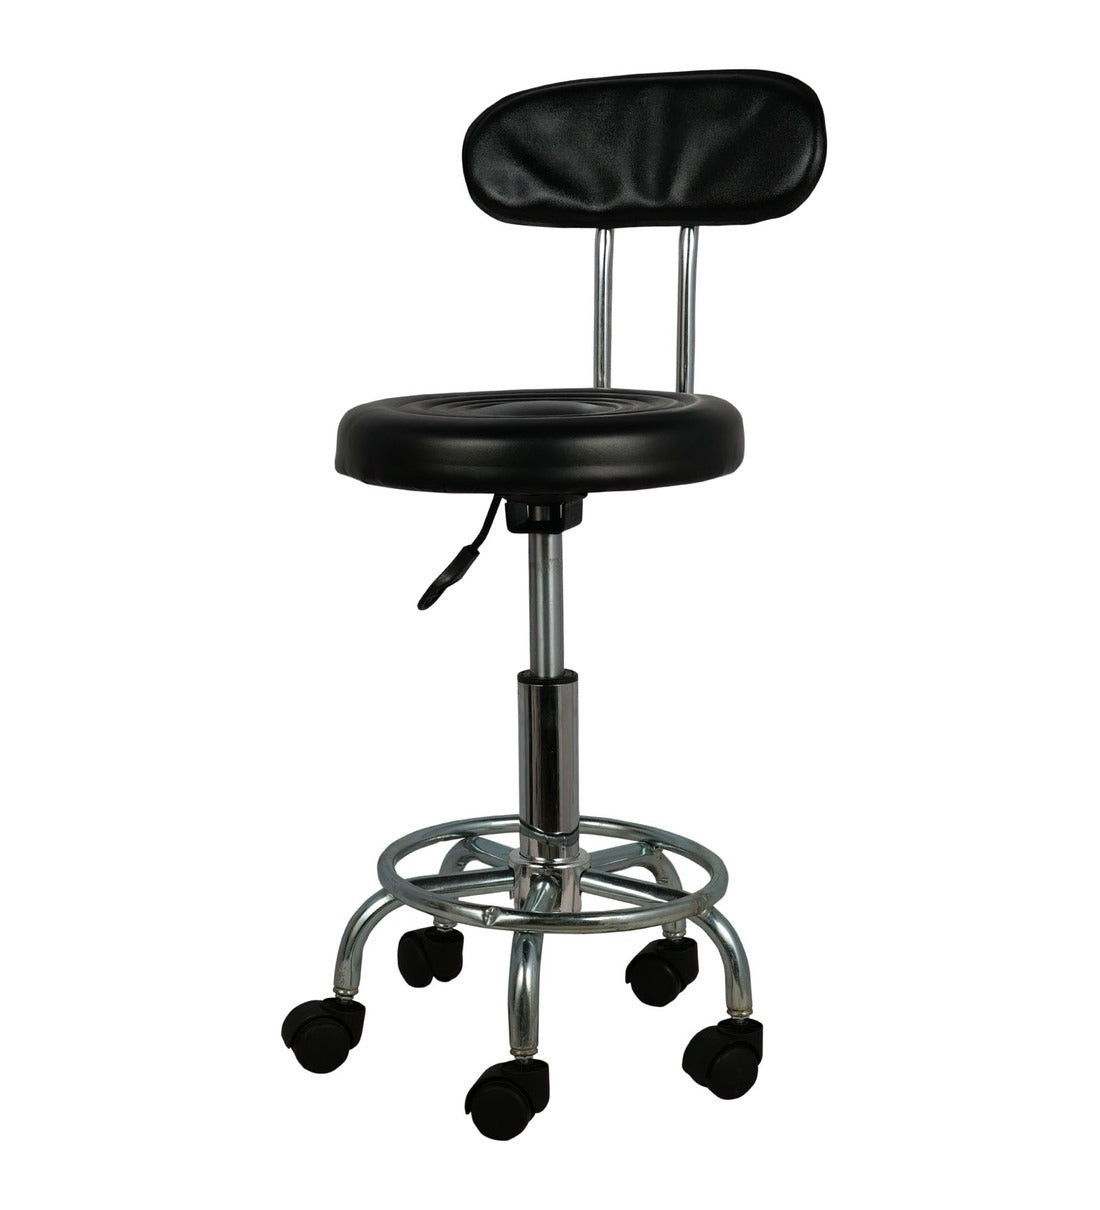 Detec™ Barstool in Black Colour With Leatherette Material